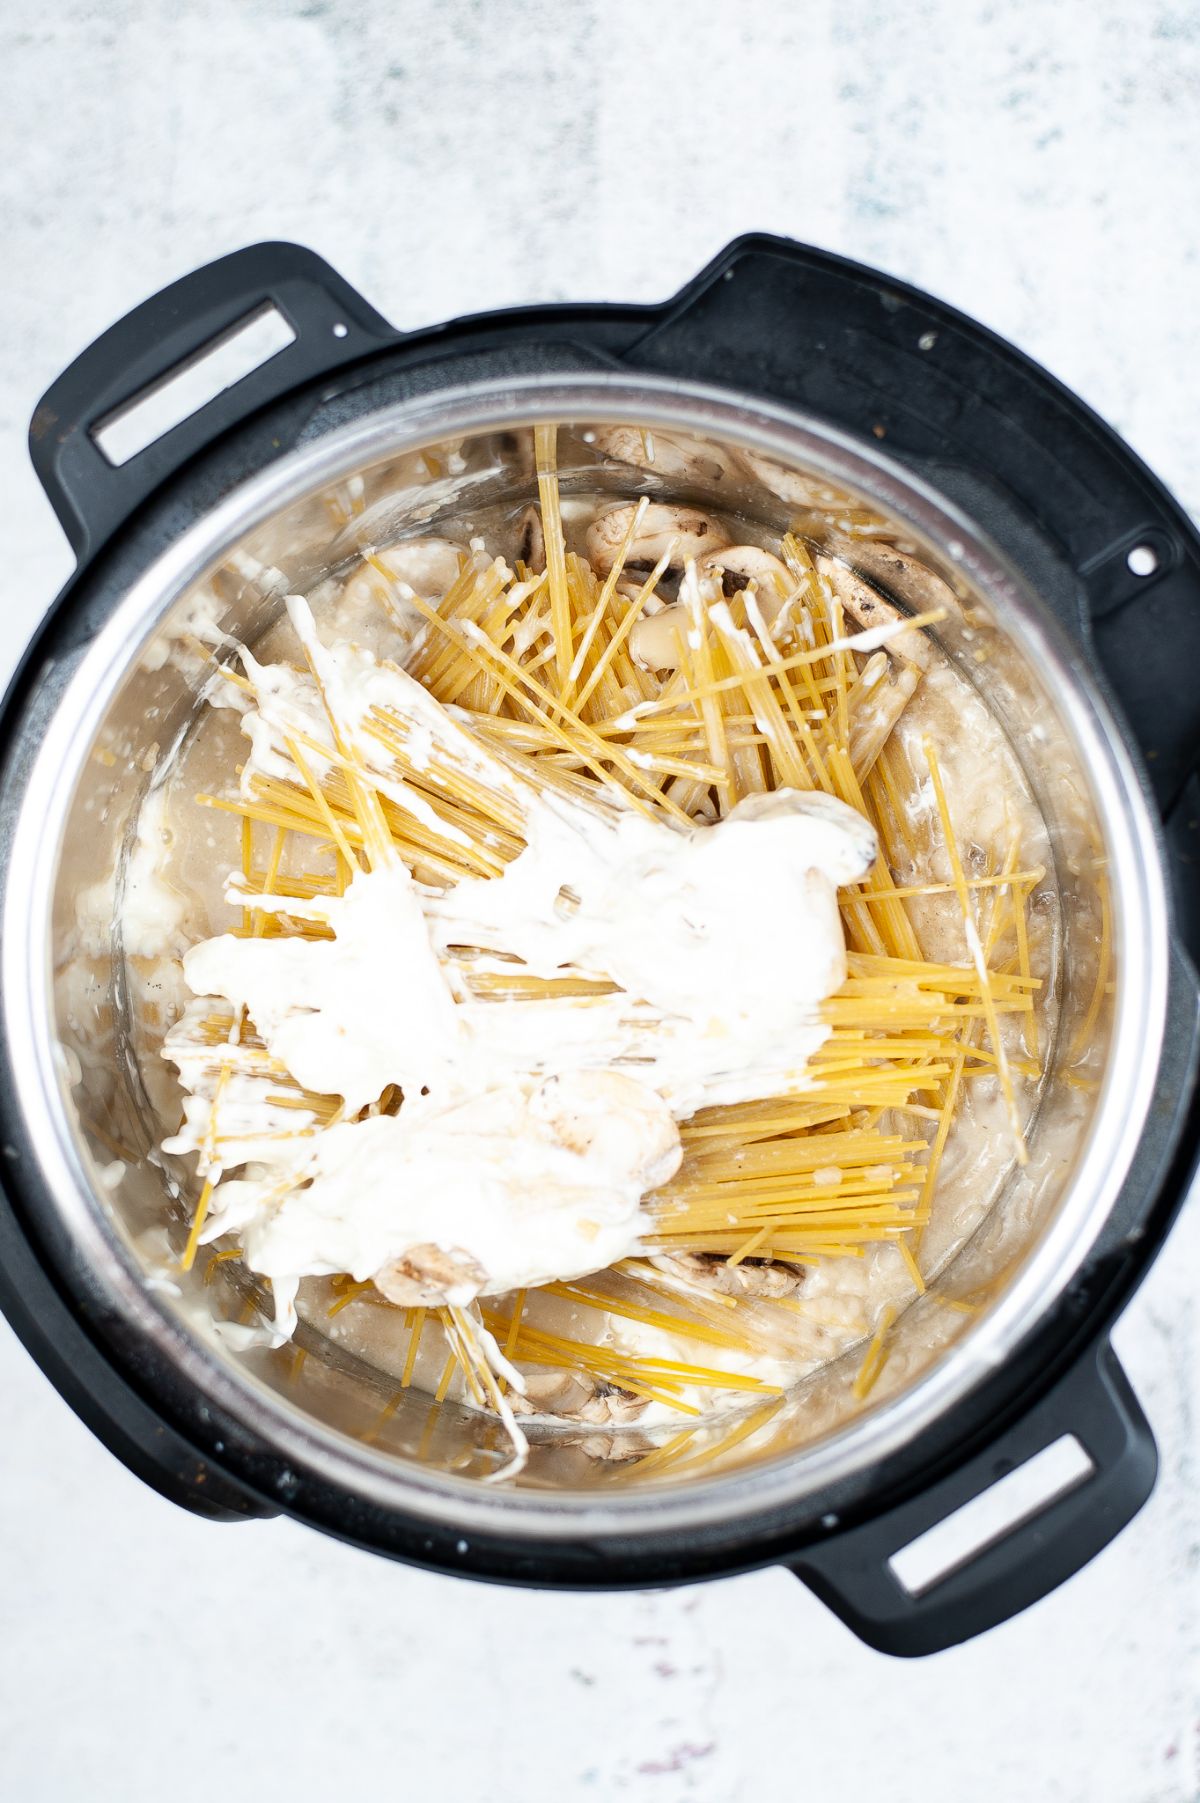 Shredded chicken in the instant pot topped with the other ingredients: pasta, mushroom, sour cream, and broth.